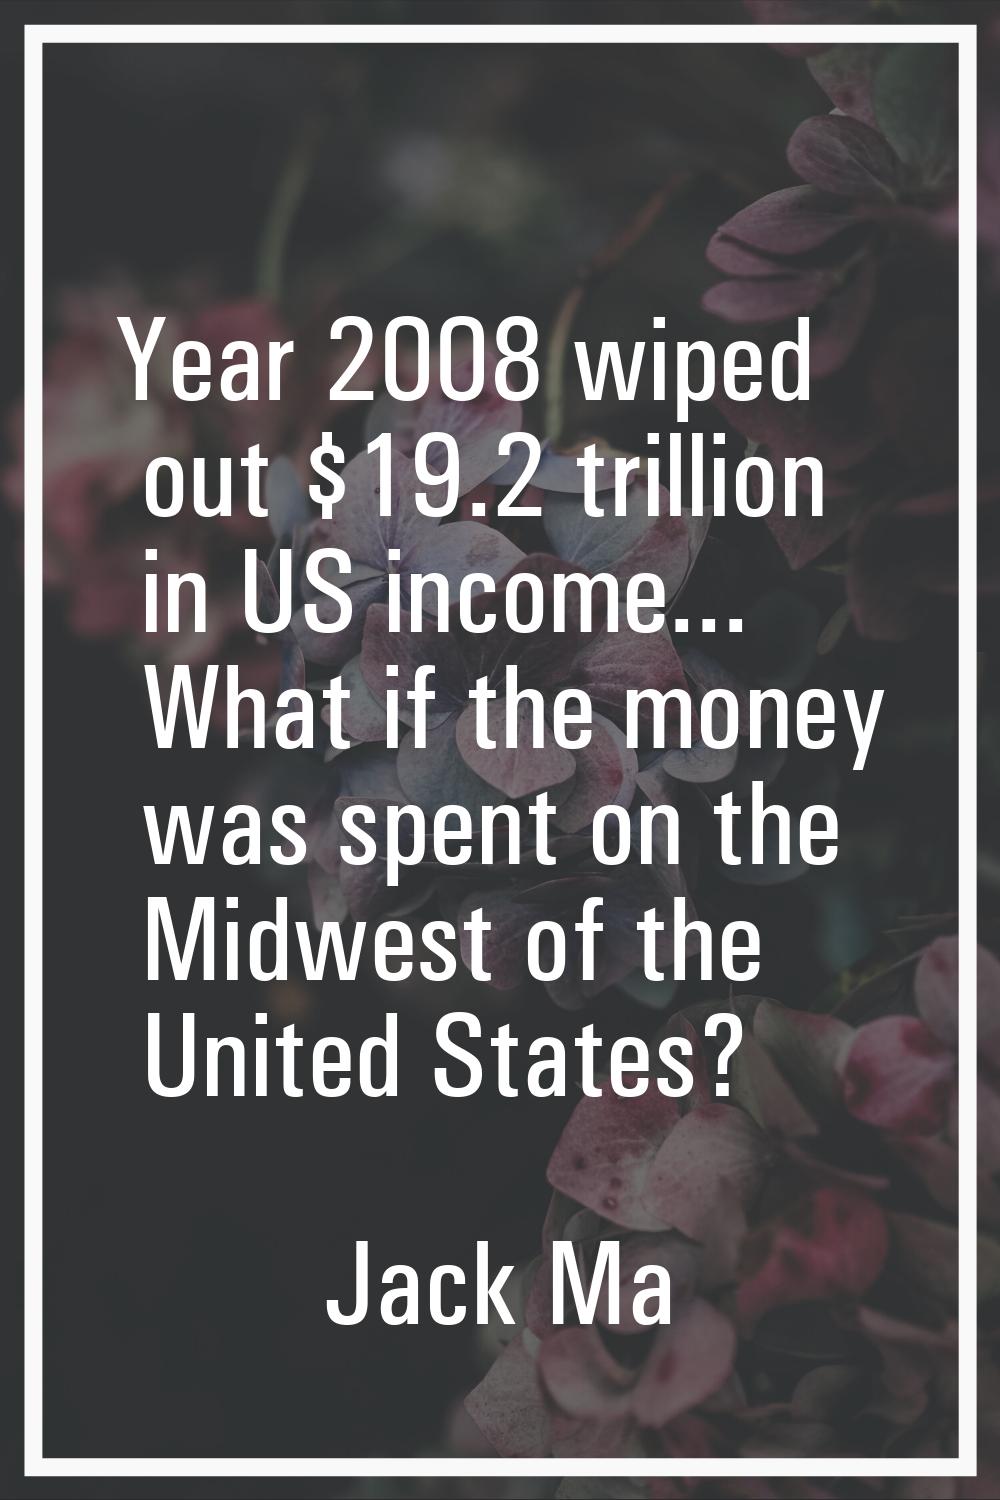 Year 2008 wiped out $19.2 trillion in US income... What if the money was spent on the Midwest of th